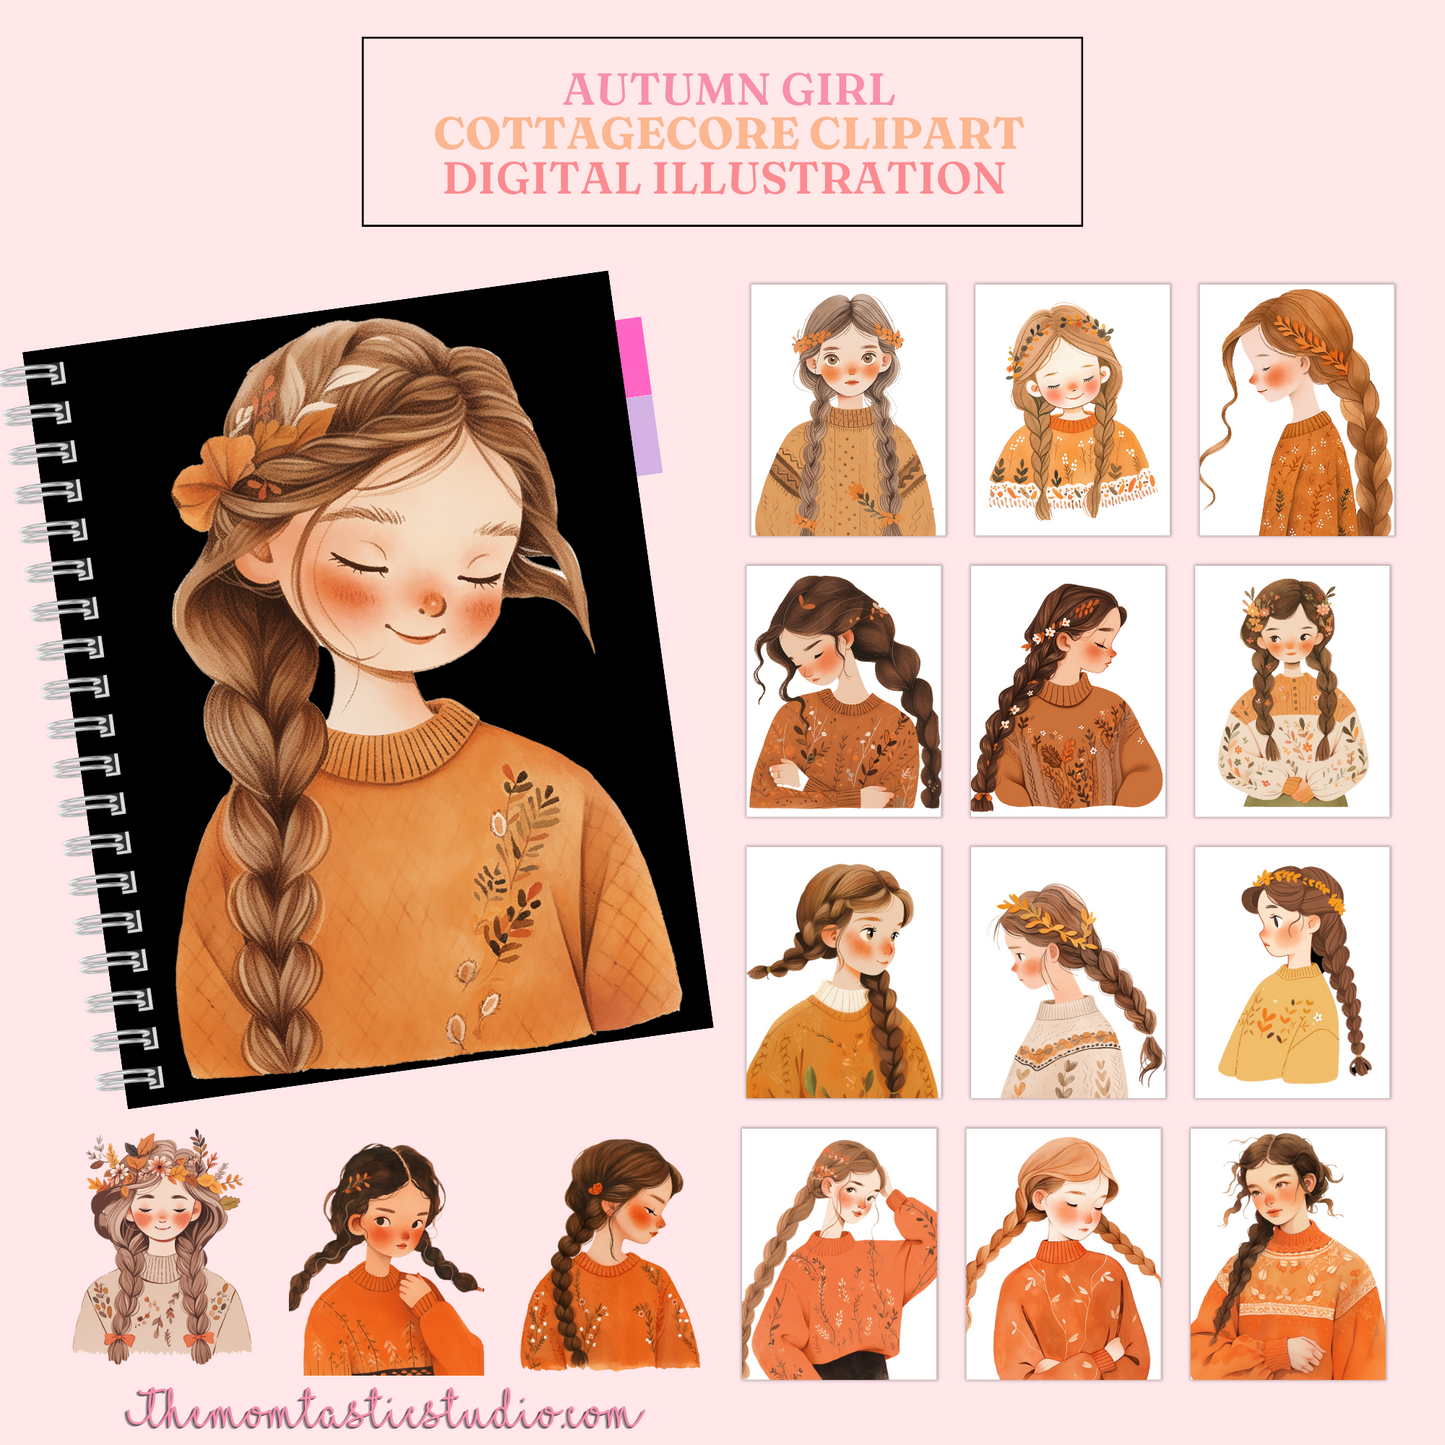 Autumn Girl Cottagecore Cliparts – High-Quality PNG - Transparent Background - Commercial Use